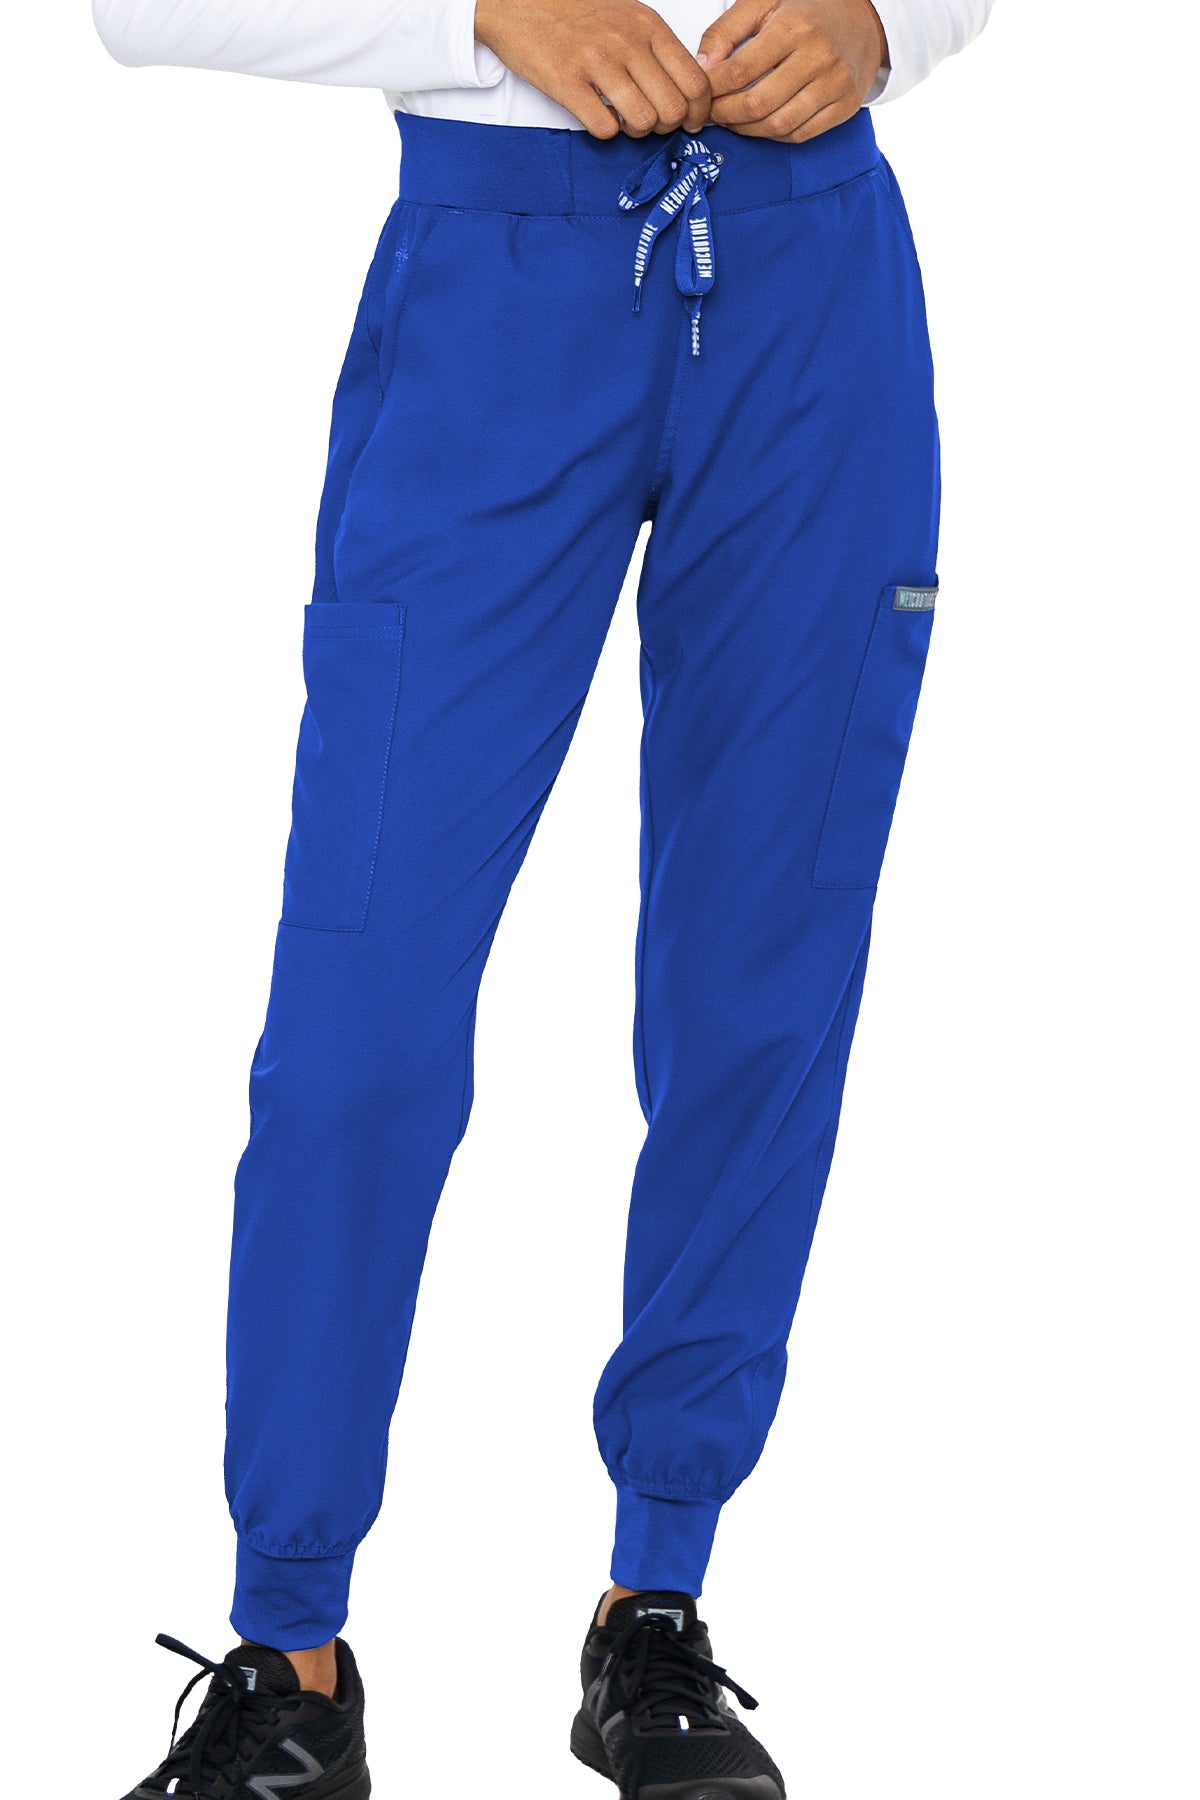 Med Couture 2711 Insight Jogger Pant Royal Blue